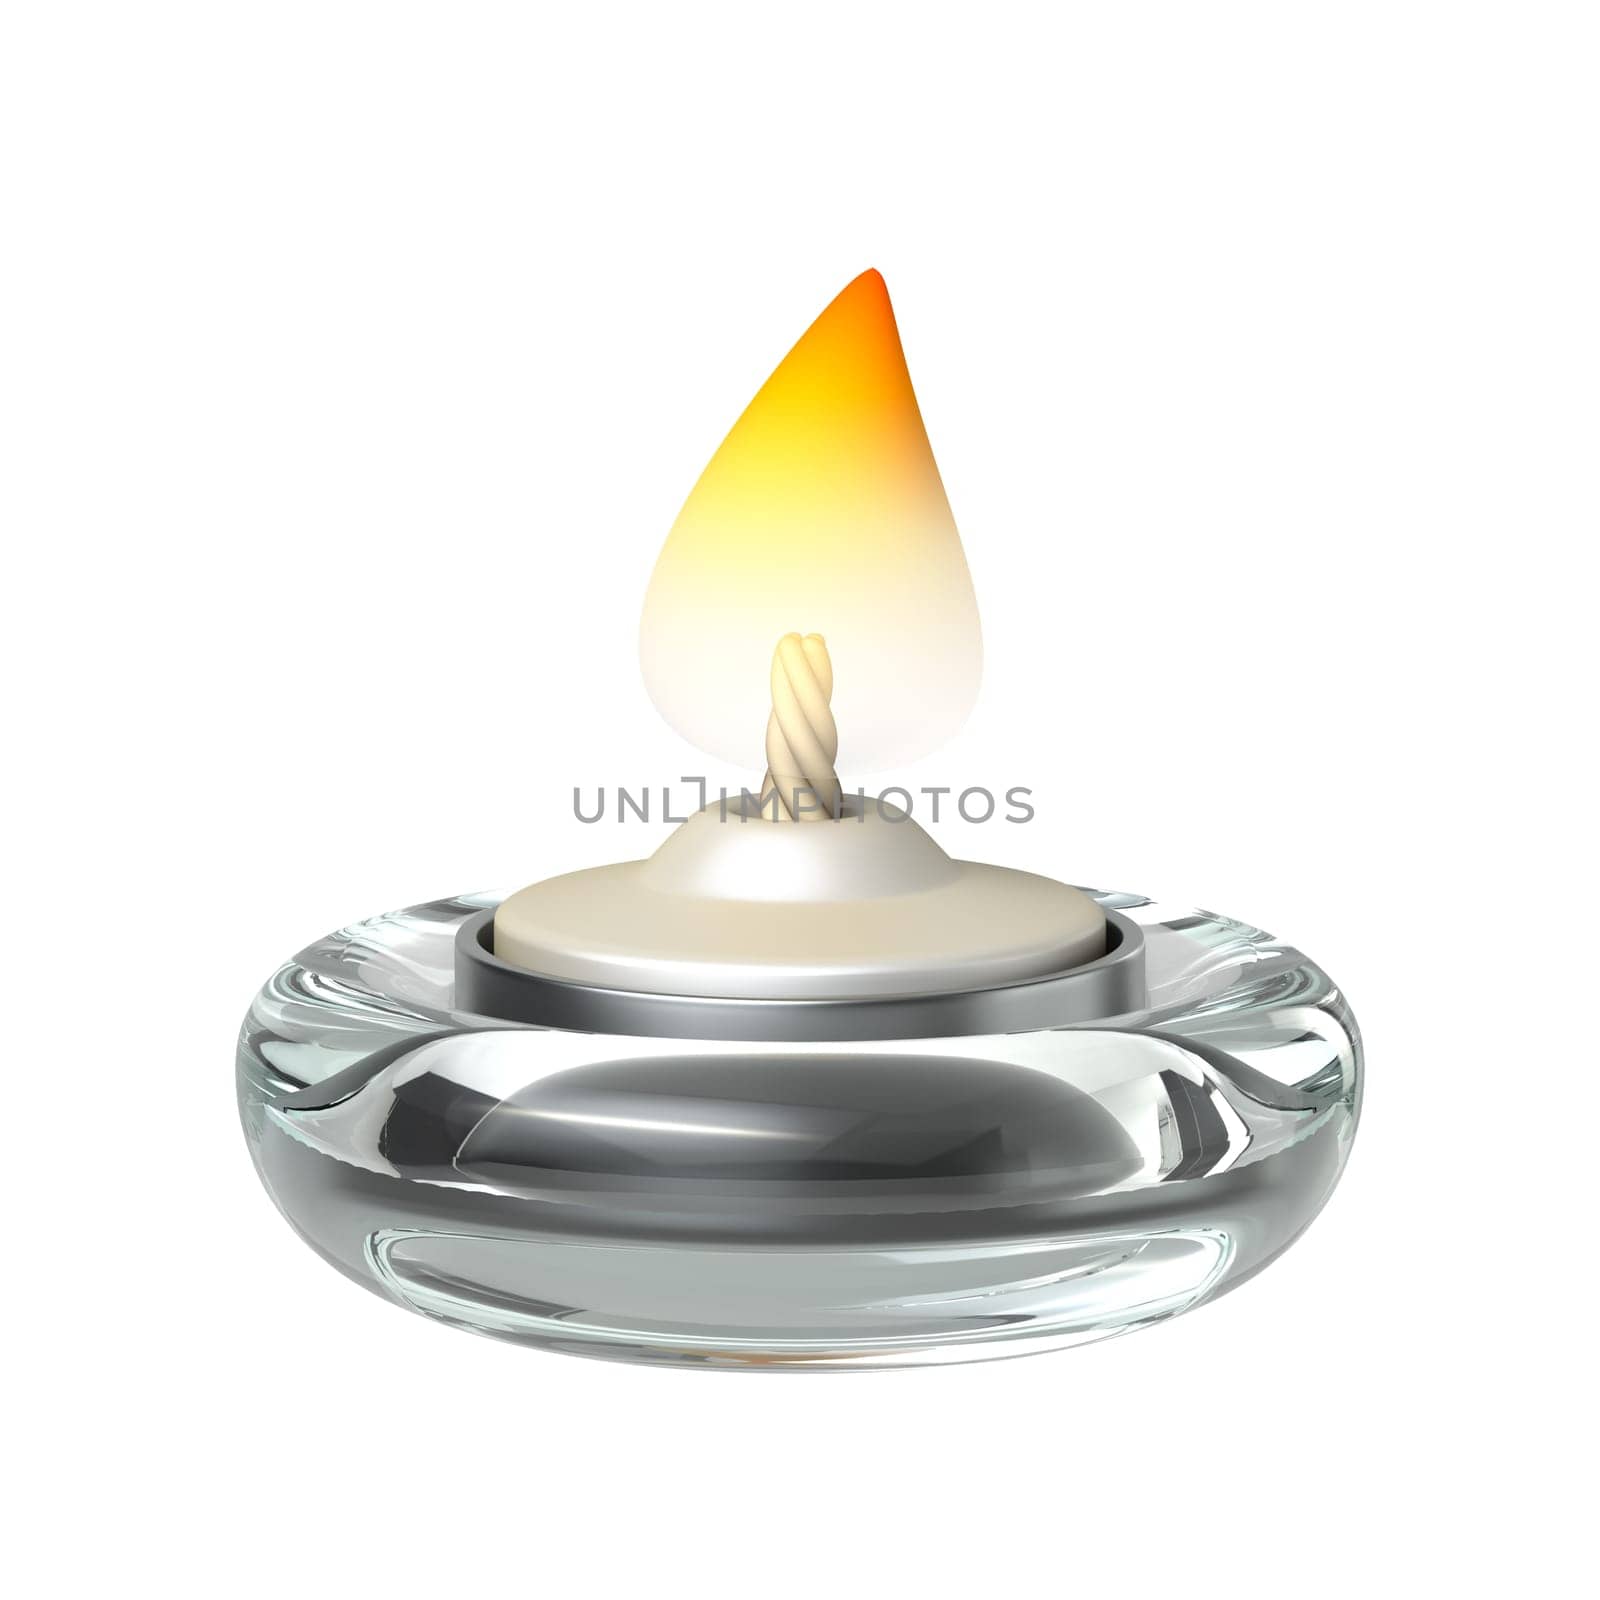 Simple cartoon glass candle holder 3D rendering illustration isolated on white background